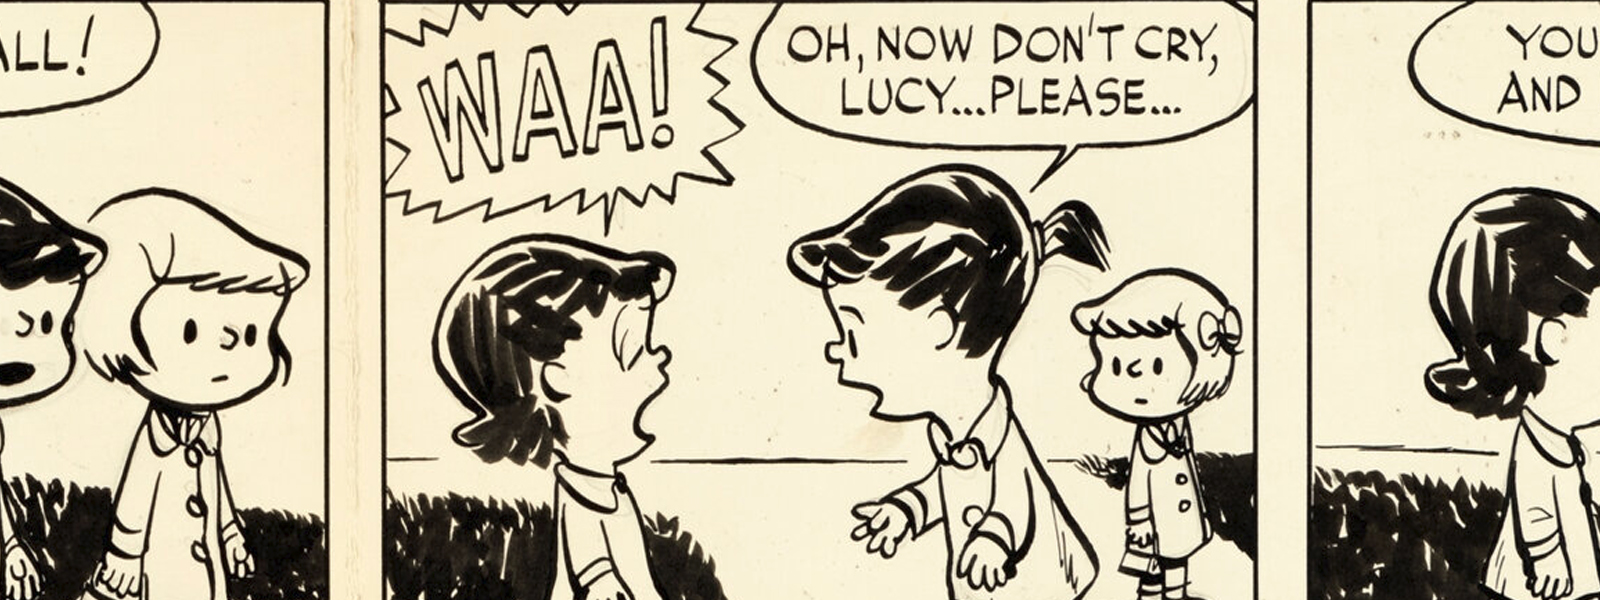 header - Charles Schulz-Lucy article